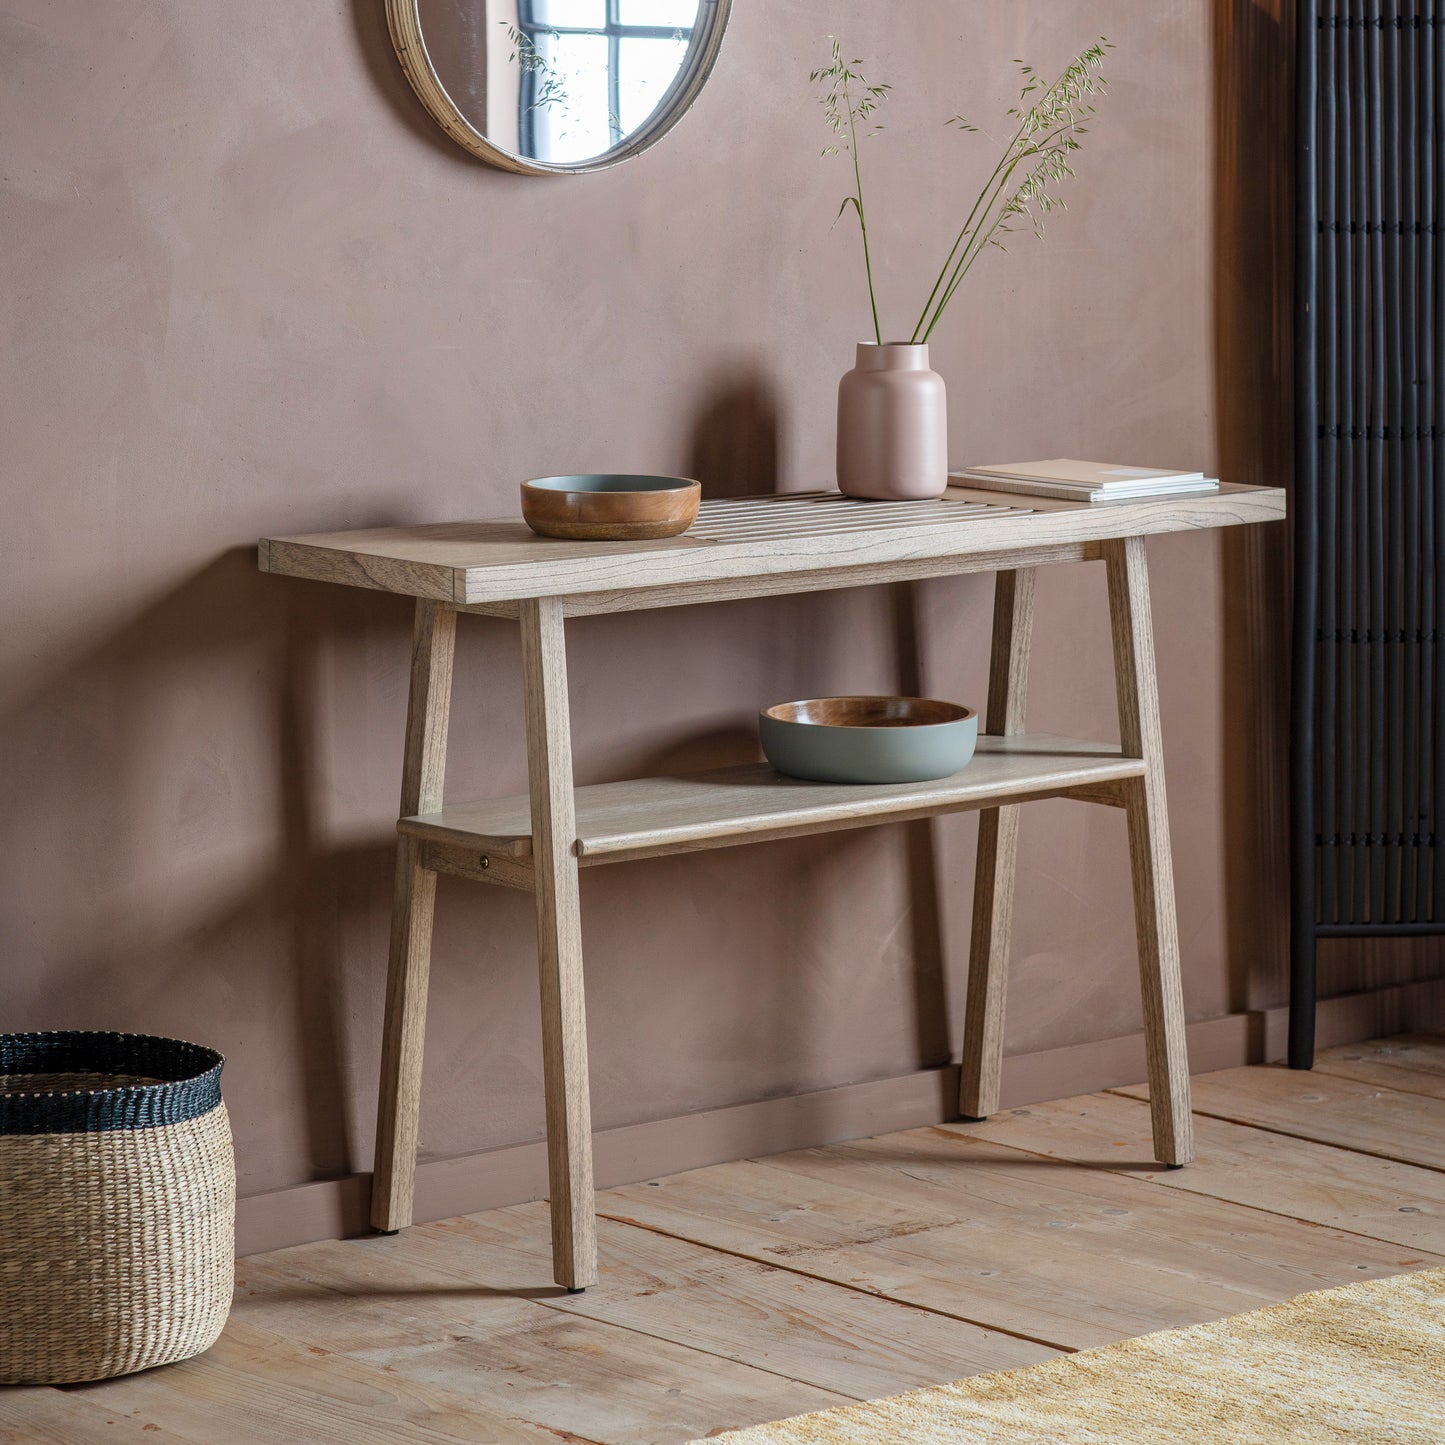 A sleek Alvington Console Table with mirror and basket, perfect for interior decor.